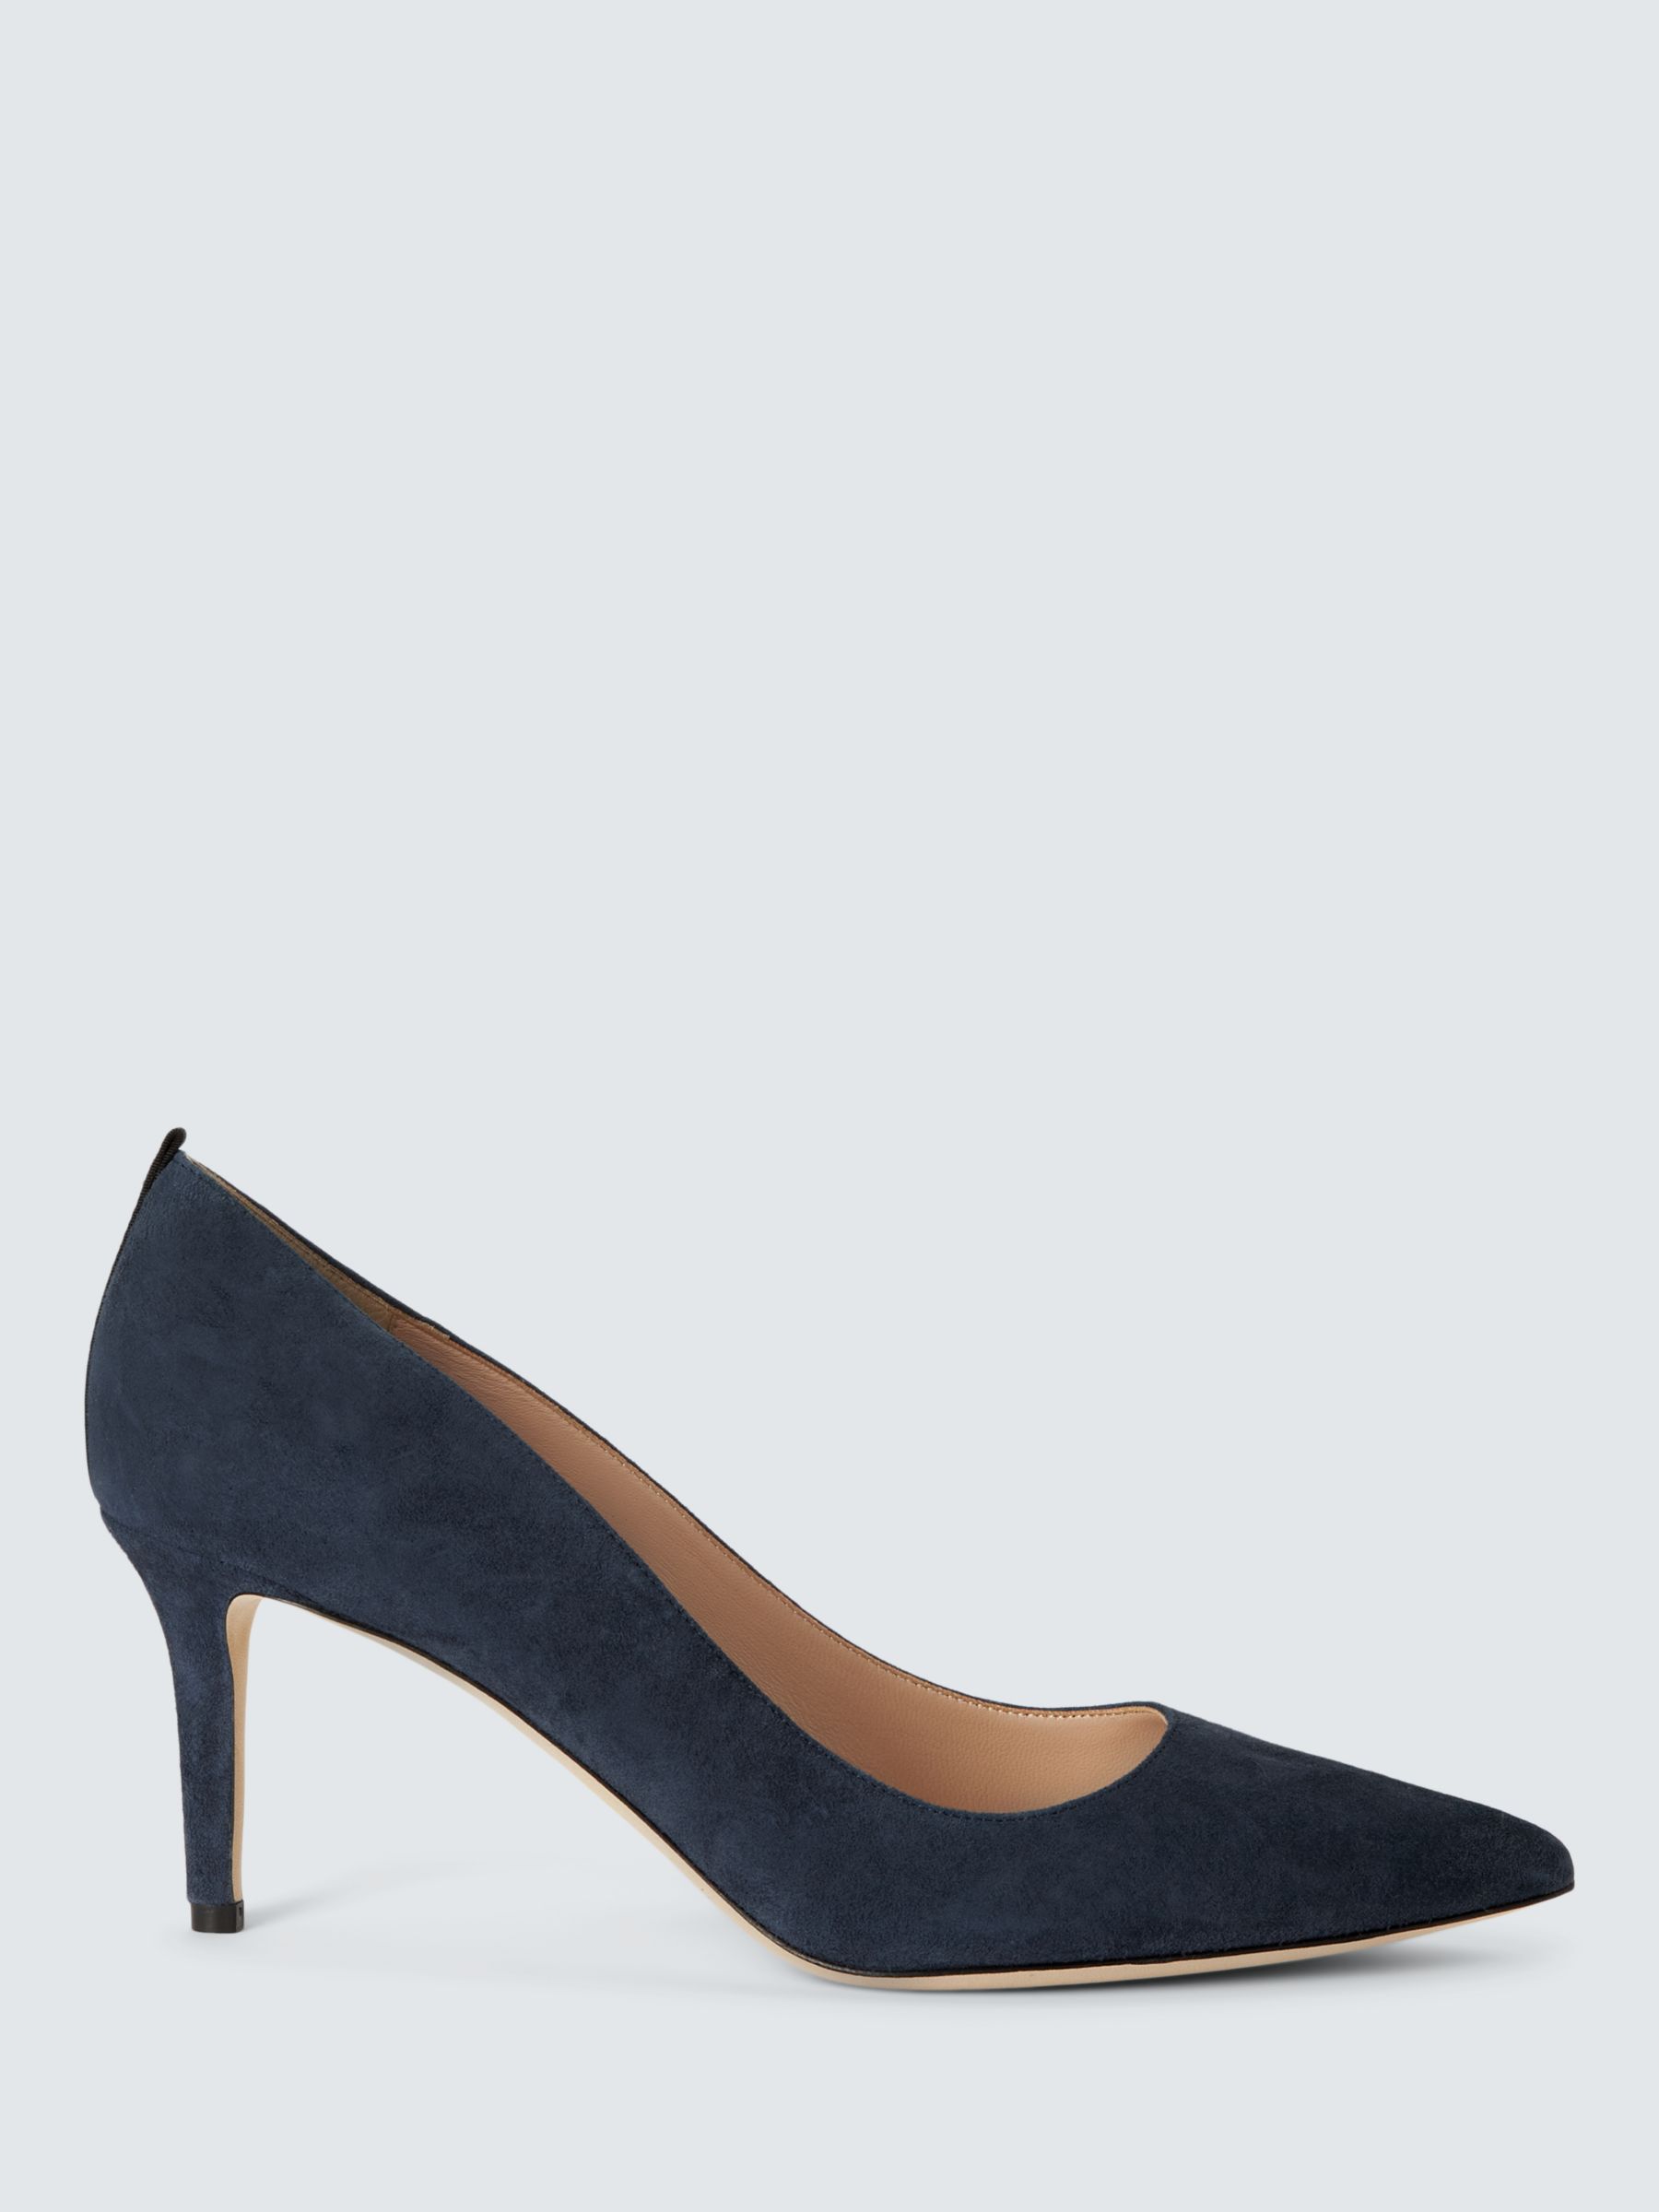 SJP by Sarah Jessica Parker Fawn 70 Suede Court Shoes